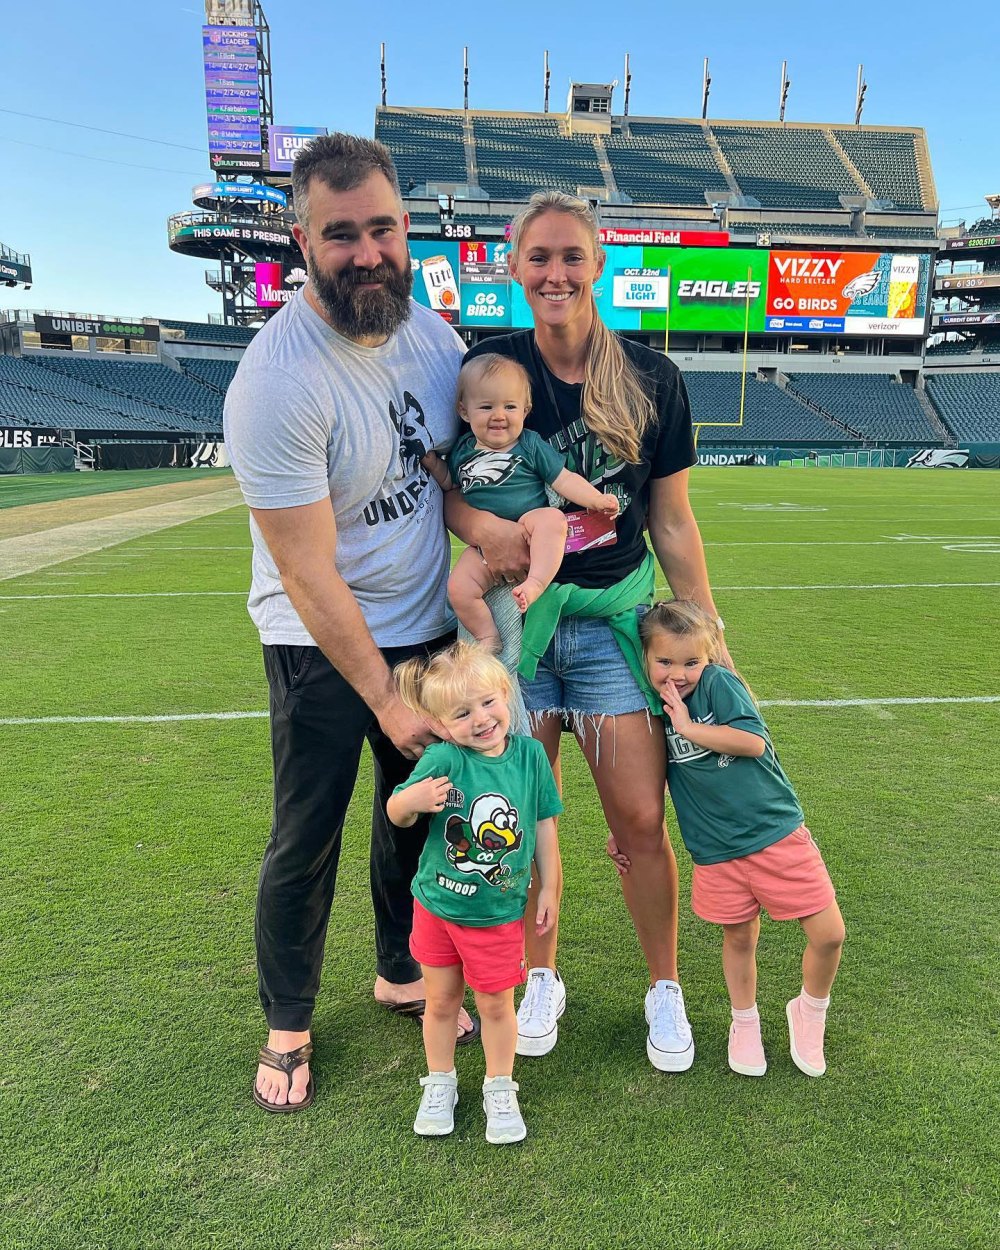 Kylie Kelce renews her favorite necklace with her daughters' initials, Our Muffins 882